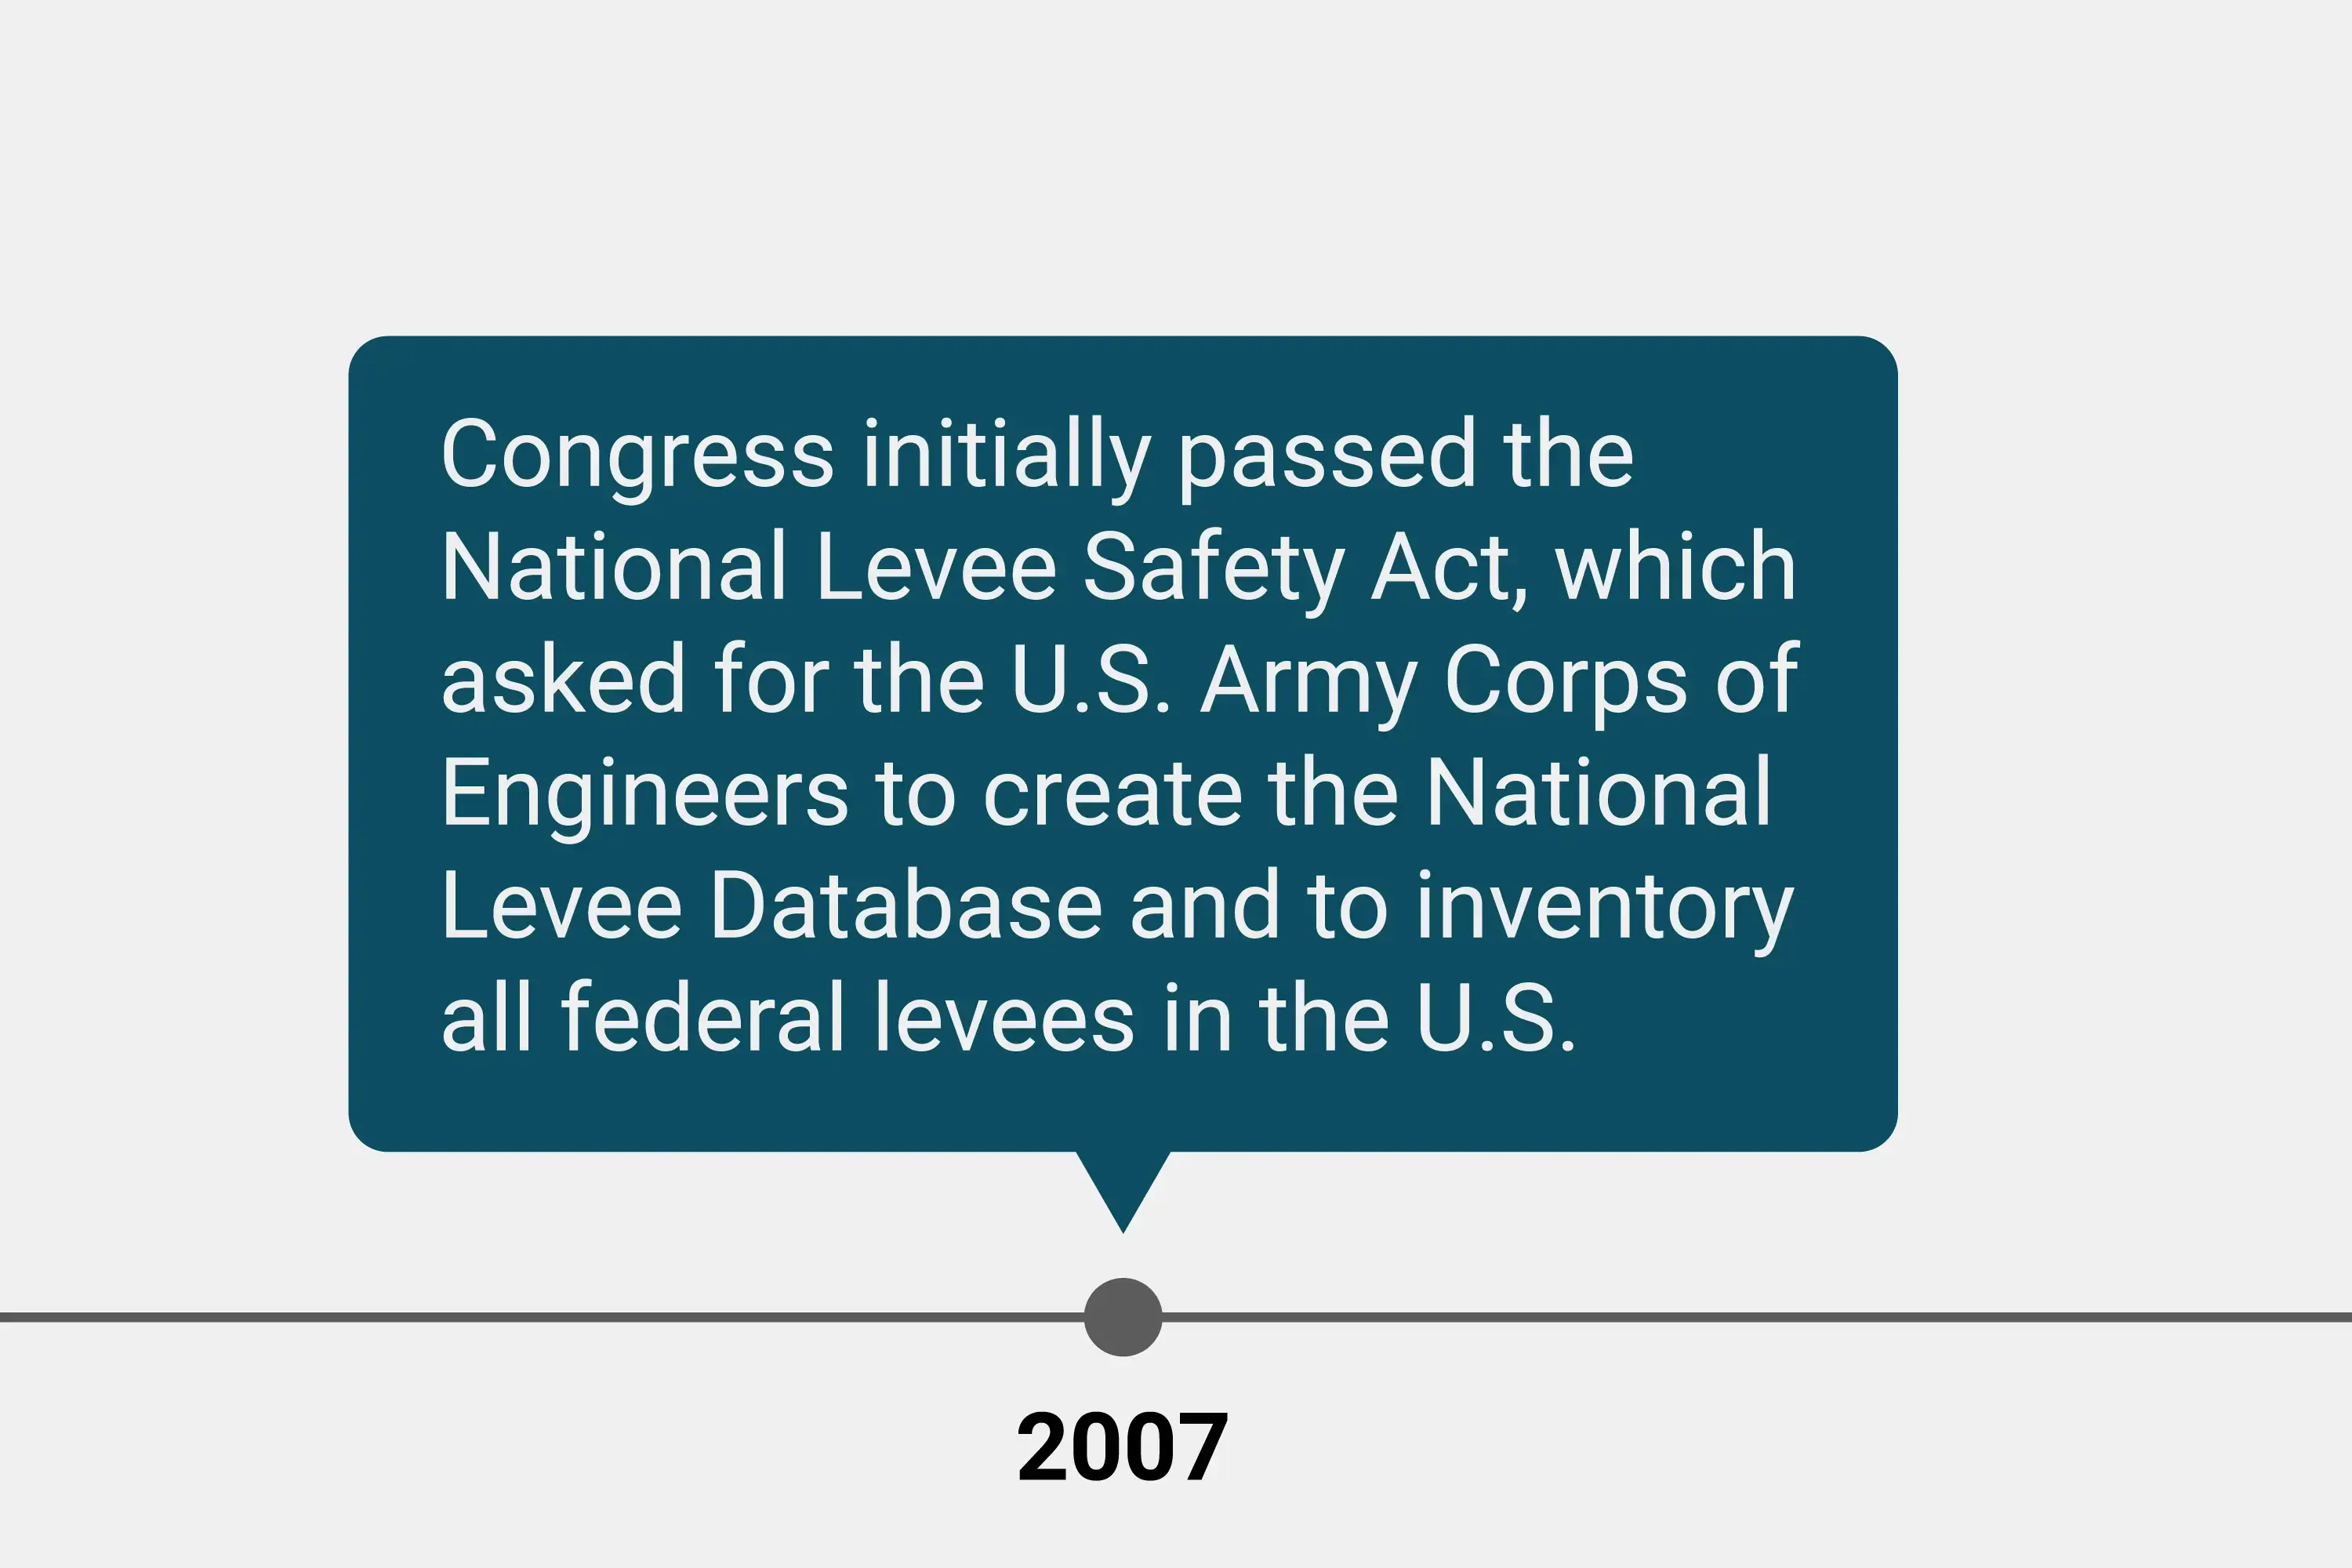 History of National Levee Database up to 2007.